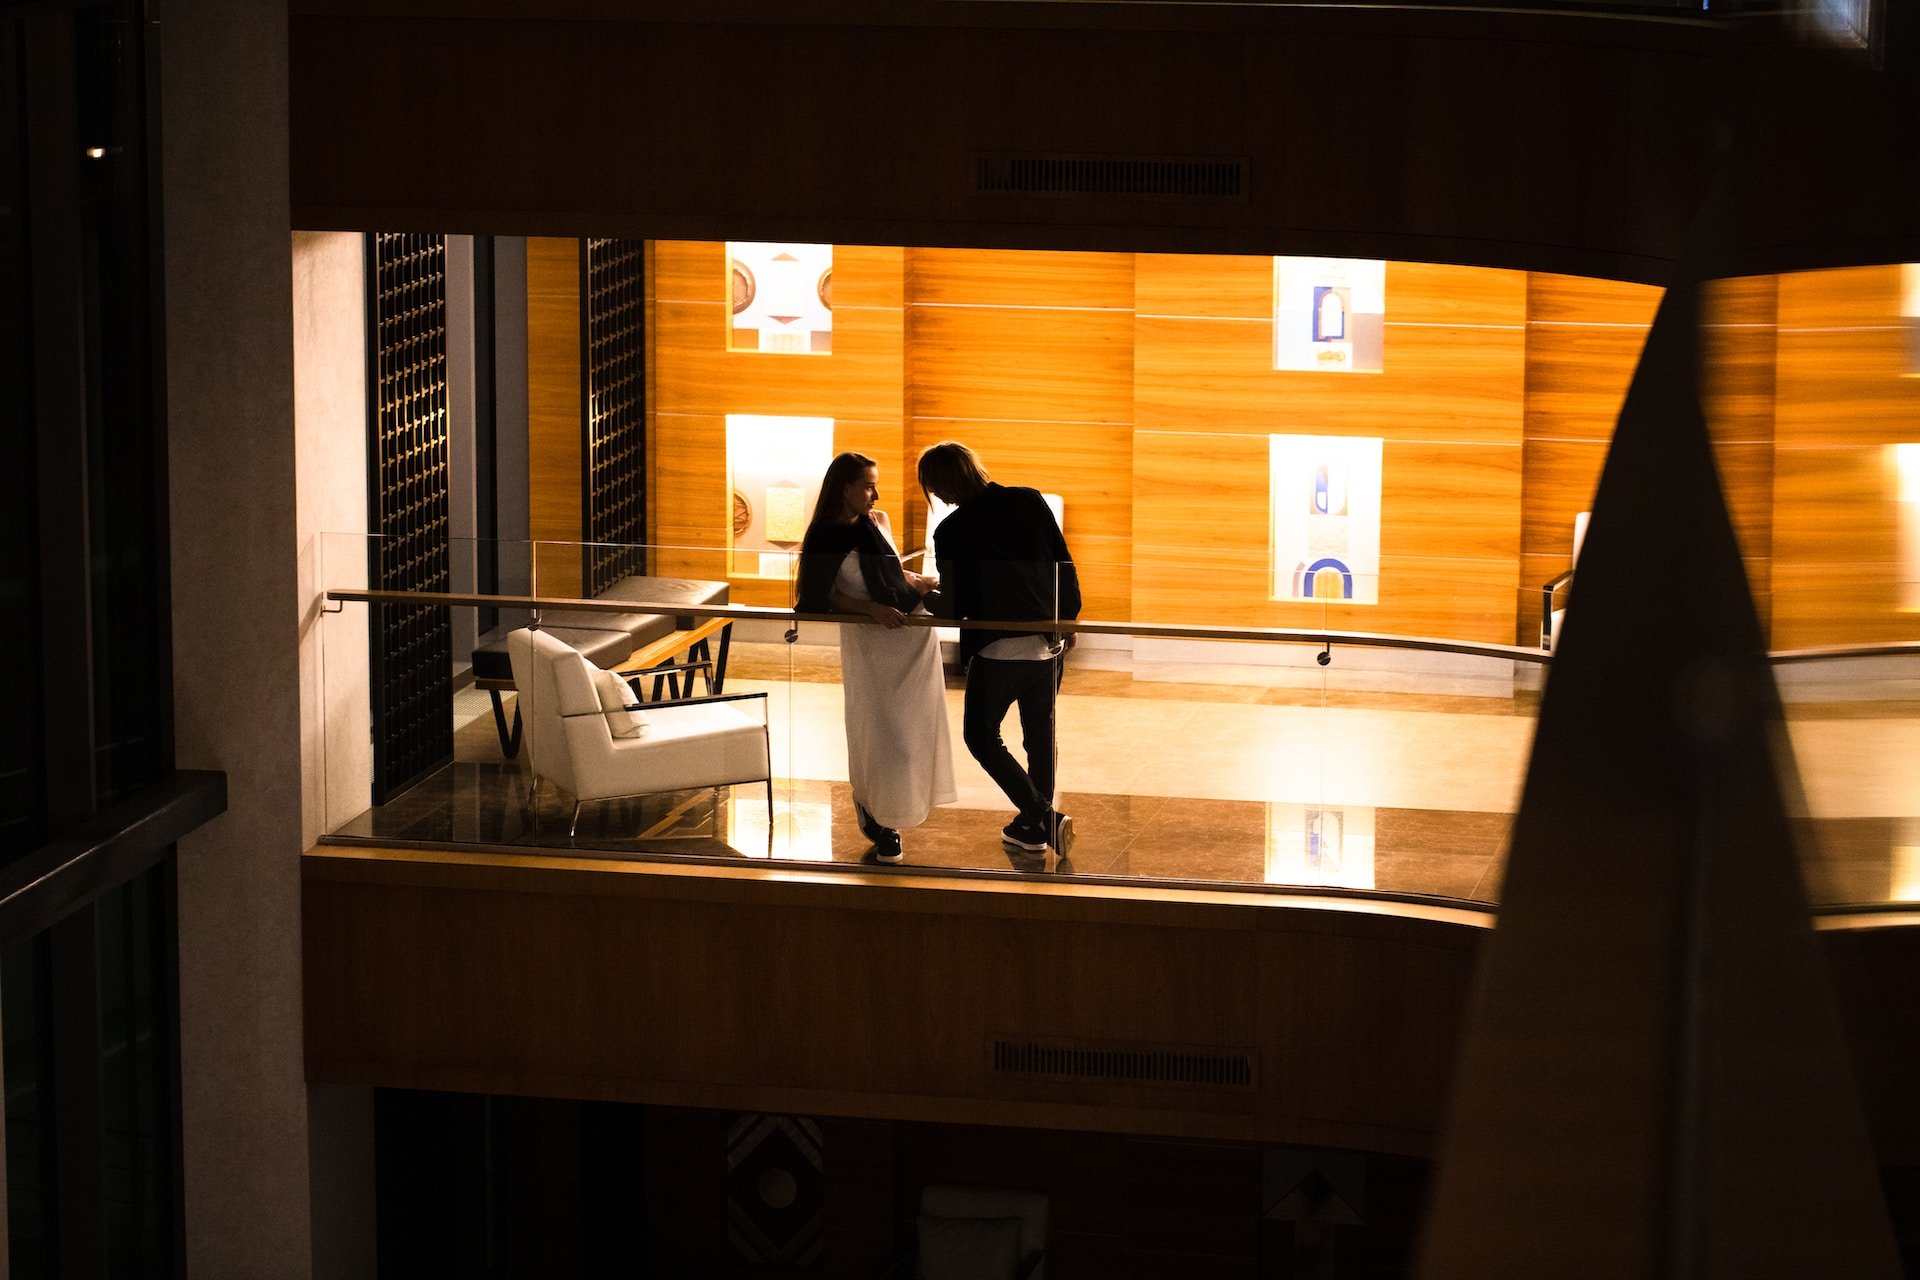 Couple is standing in a hotel balcony